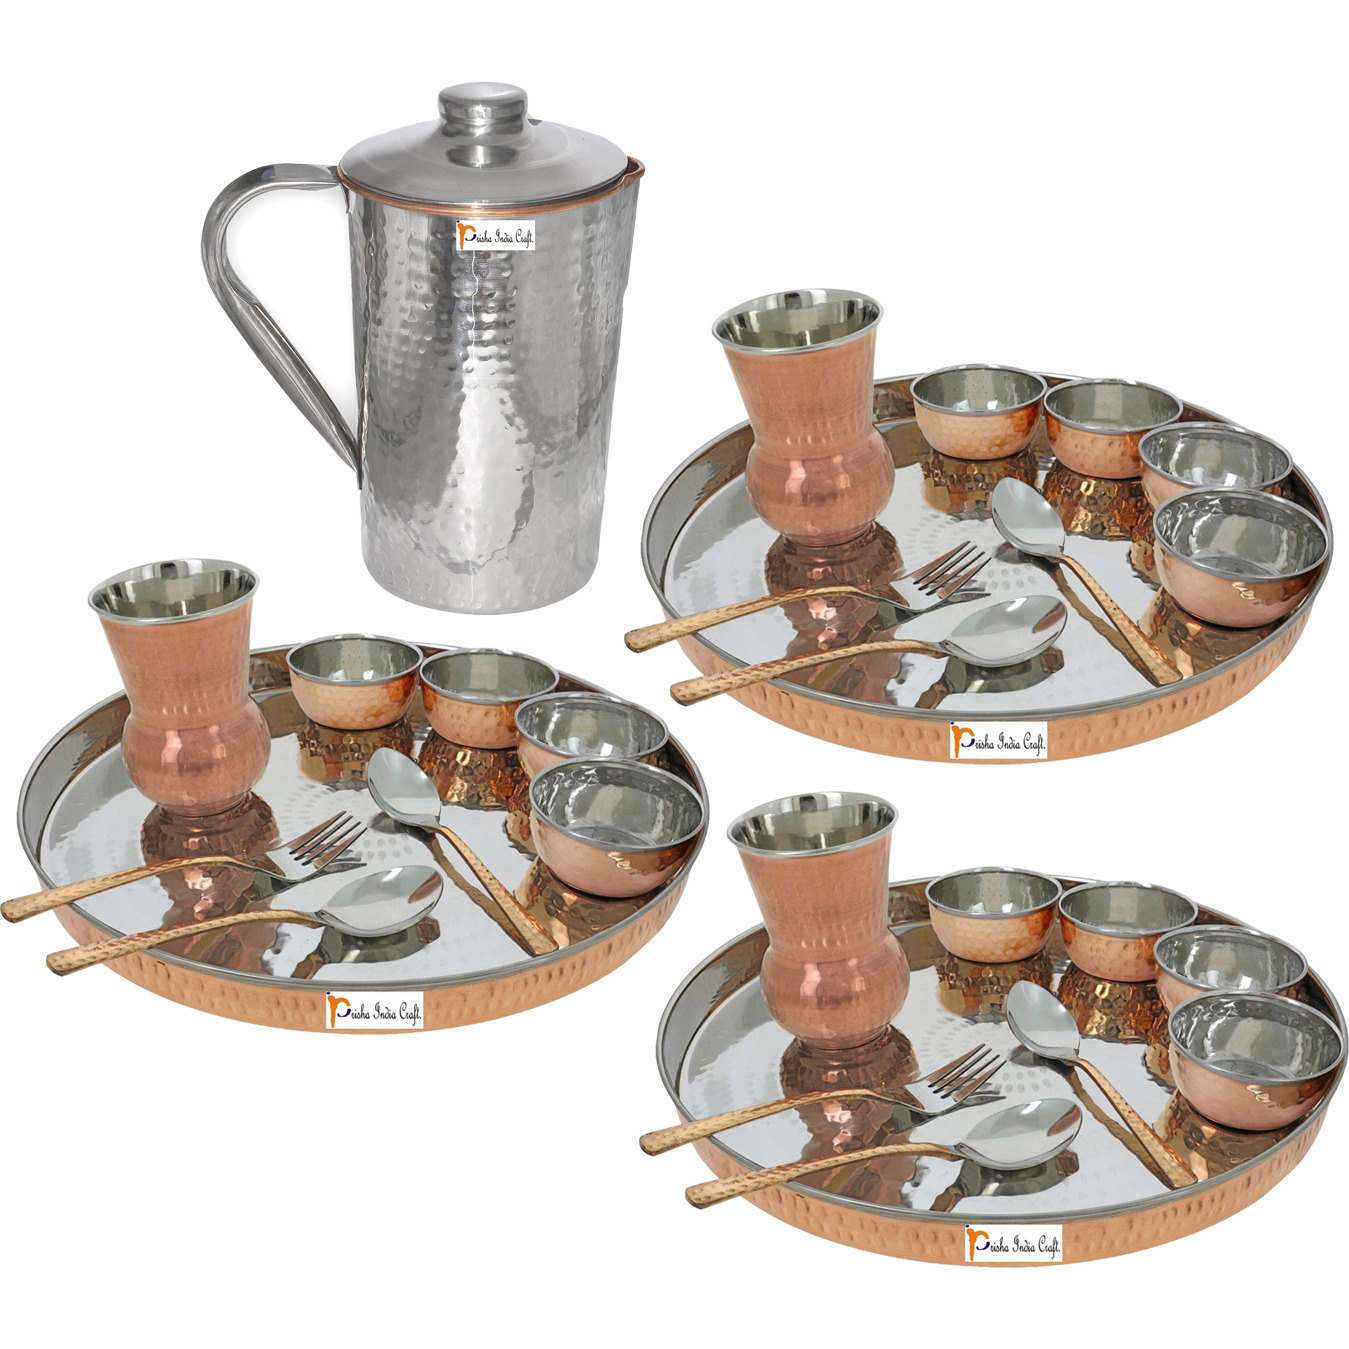 Prisha India Craft B. Set of 3 Dinnerware Traditional Stainless Steel Copper Dinner Set of Thali Plate, Bowls, Glass and Spoons, Dia 13  With 1 Stainless Steel Copper Hammered Pitcher Jug - Christmas Gift